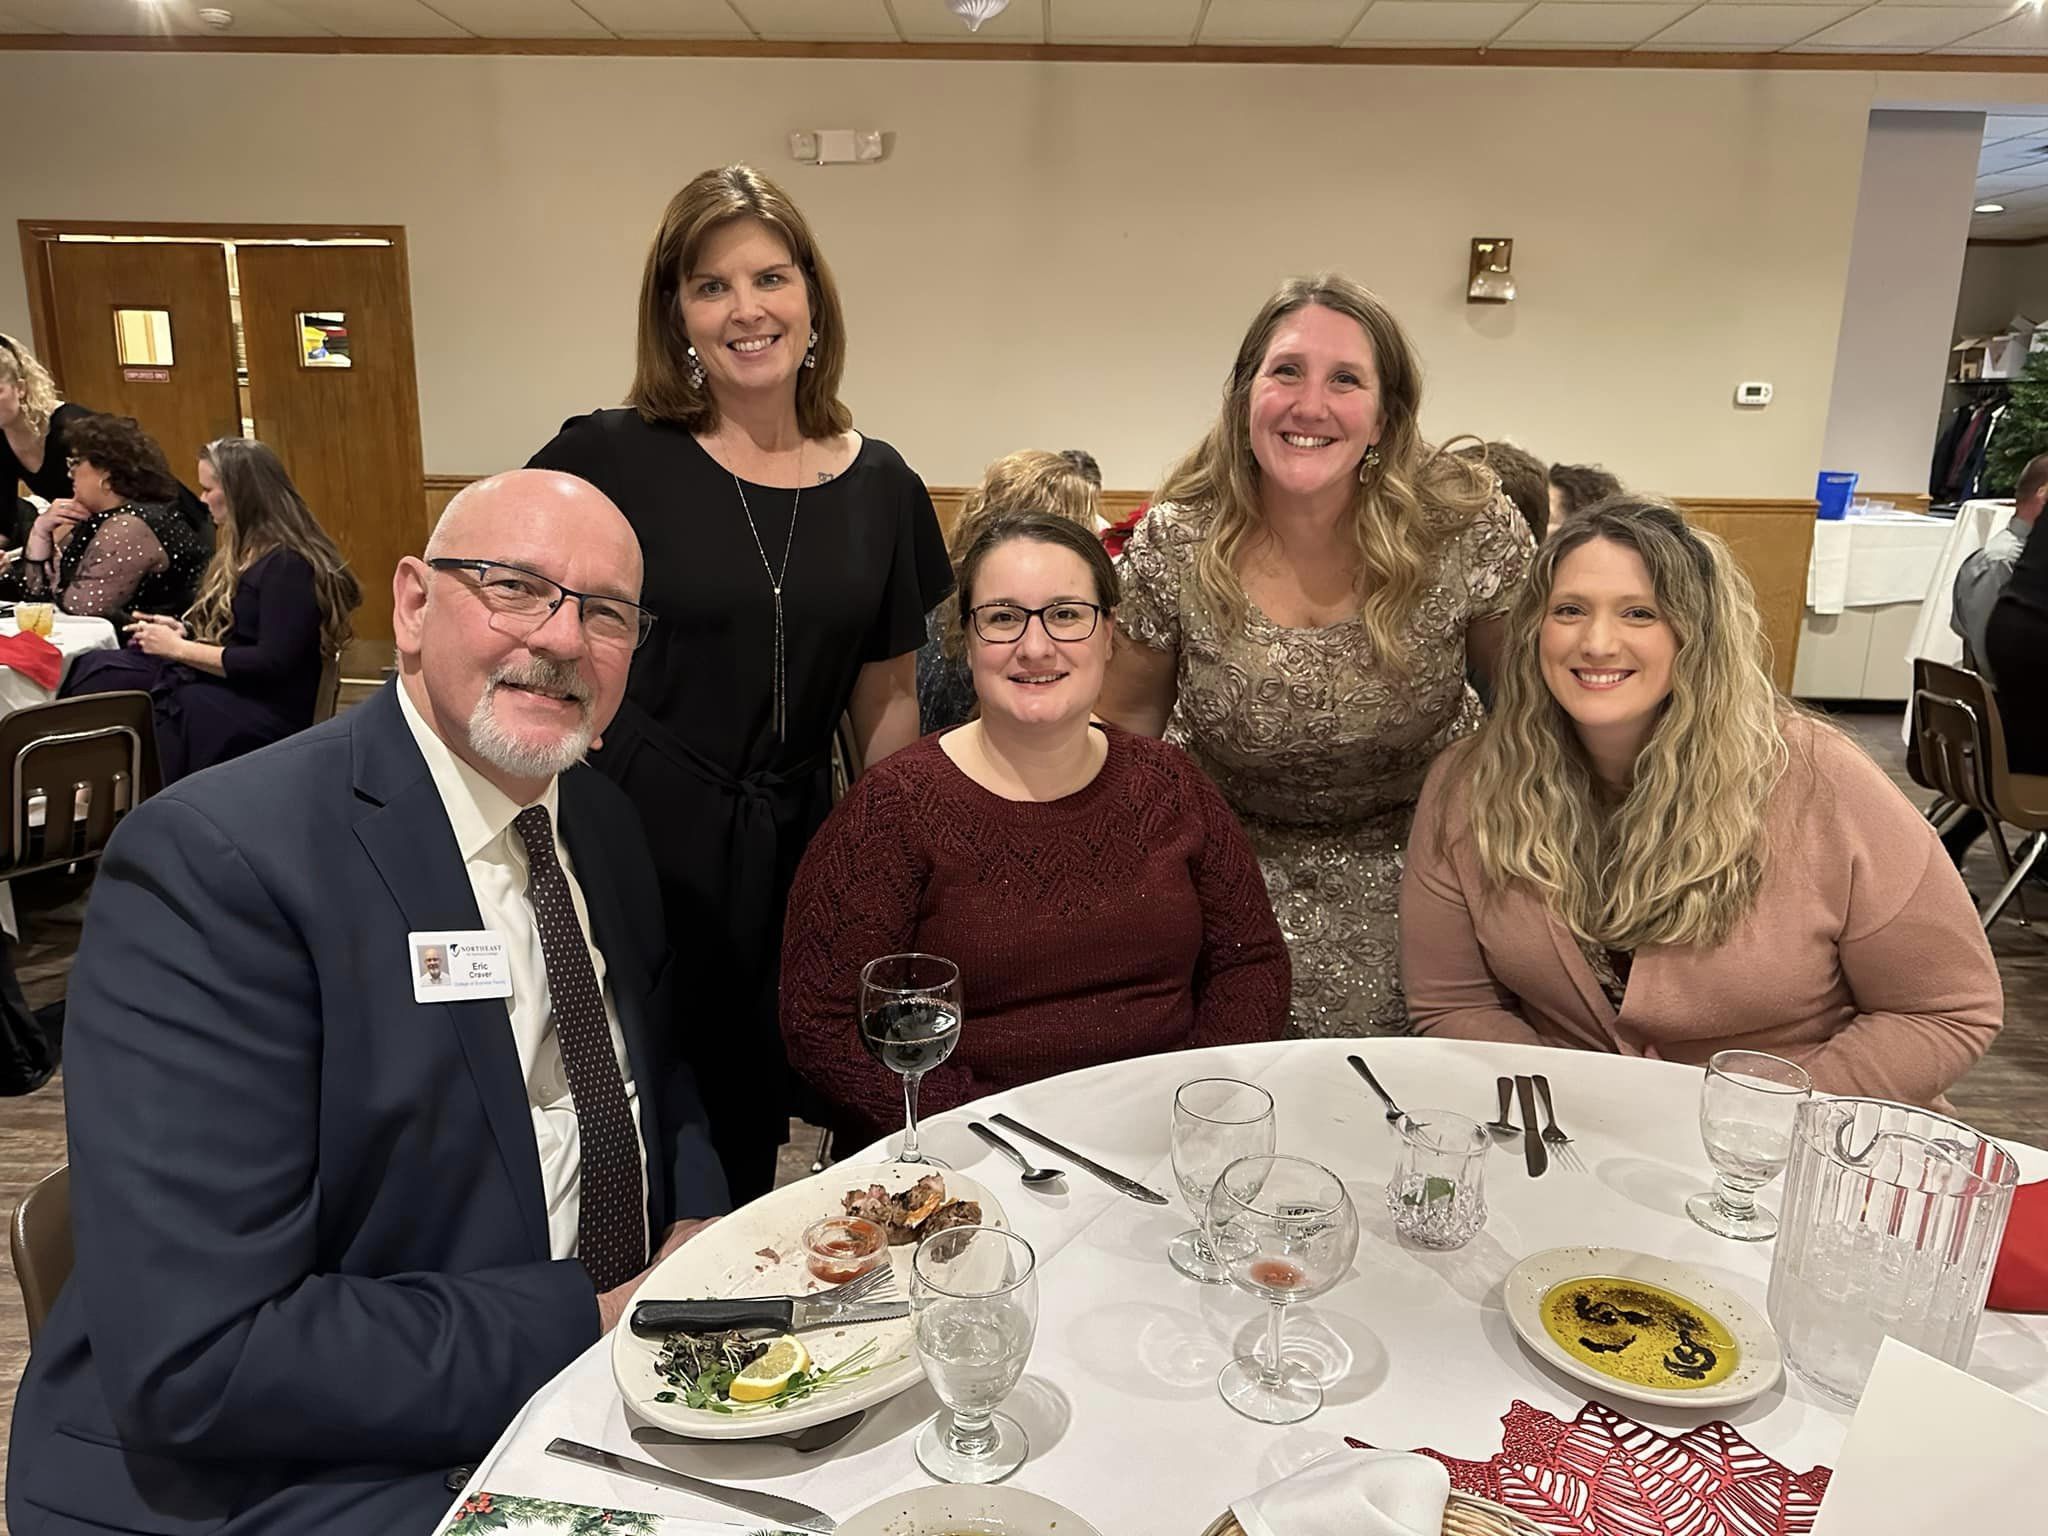 L to R: Eric Craver, Business Faculty member NWTC Marinette
Rebecca Noble, Psychology Faculty member NWTC Marinette
Kim Mech, Account Executive NWTC CTED
Cindy Bailey, Dean NWTC Marinette
Amanda Nelson, Customer Contact Marketing, NWTC Marinette
